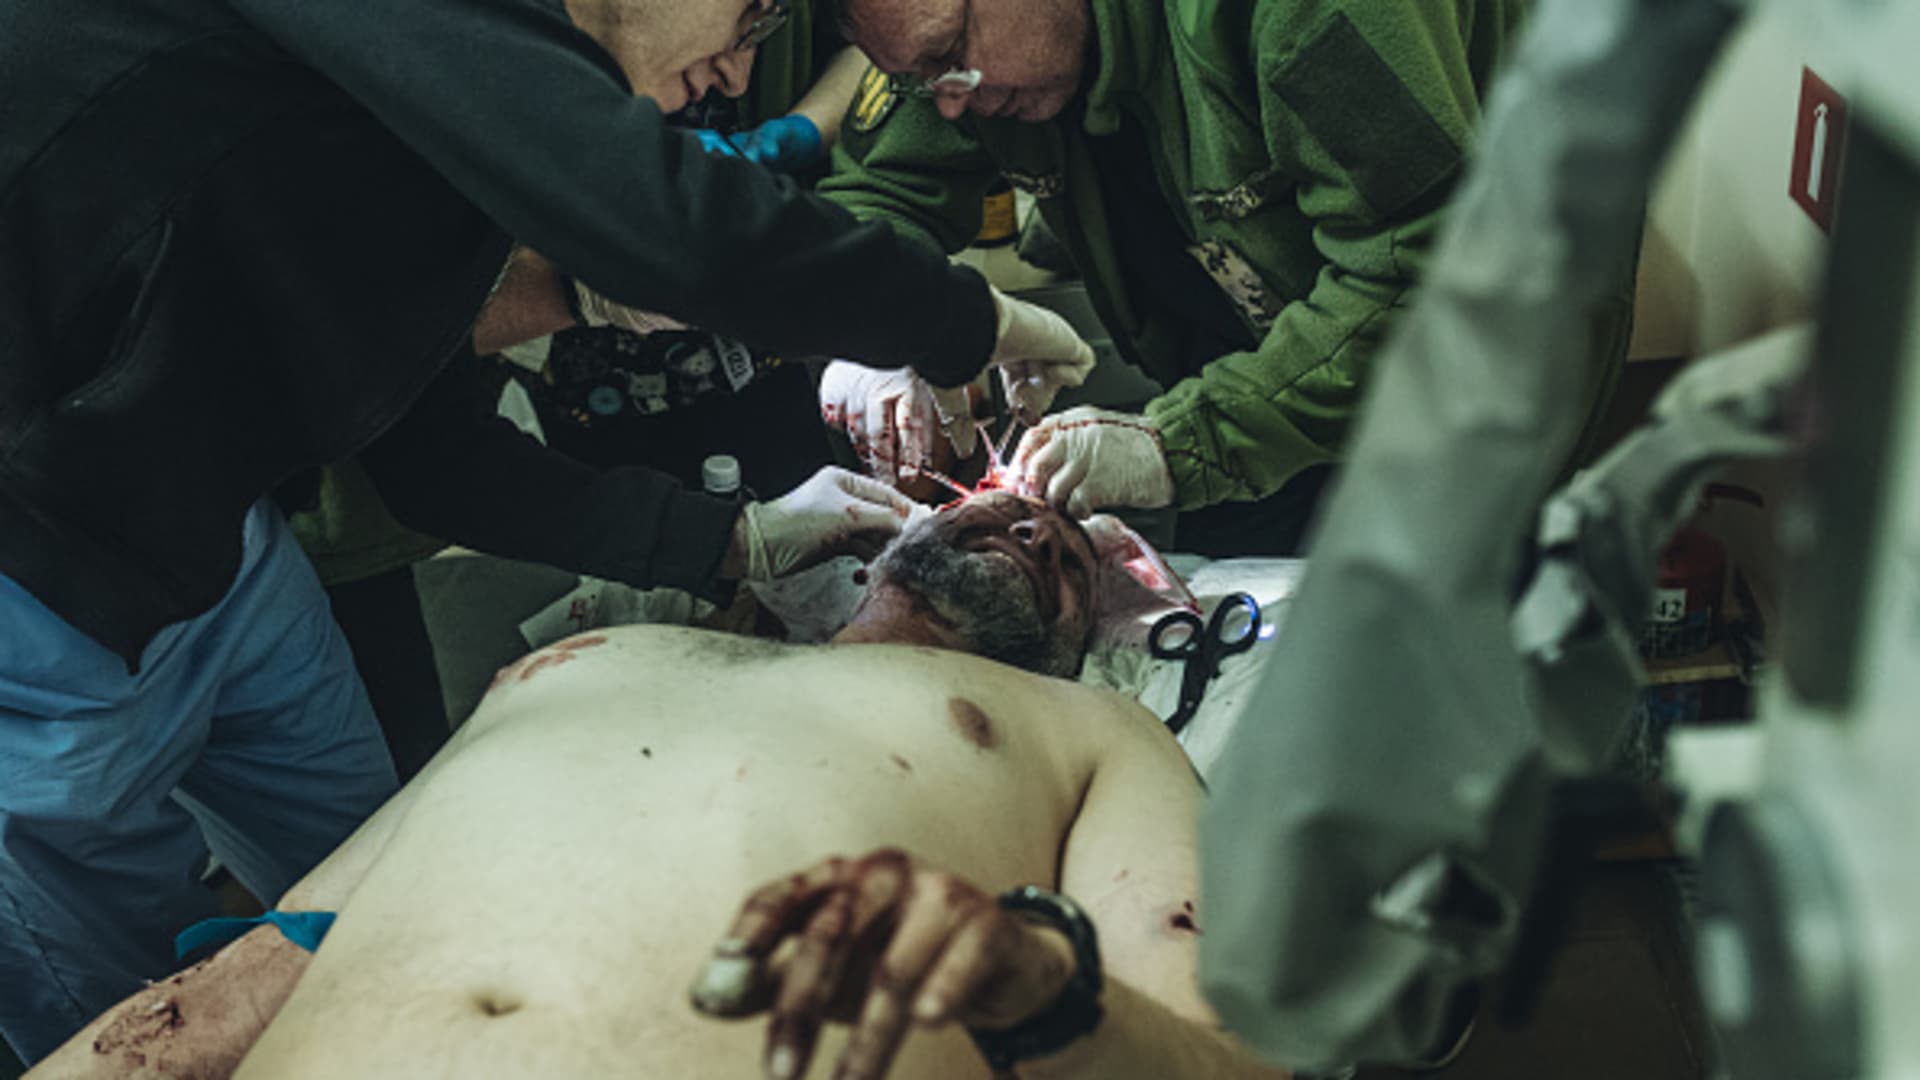 (EDITORS NOTE: Image depicts graphic content) A wounded Ukrainian soldier is being treated at the military hospital in Zaporizhzhya, Ukraine, 29 March 2022. 